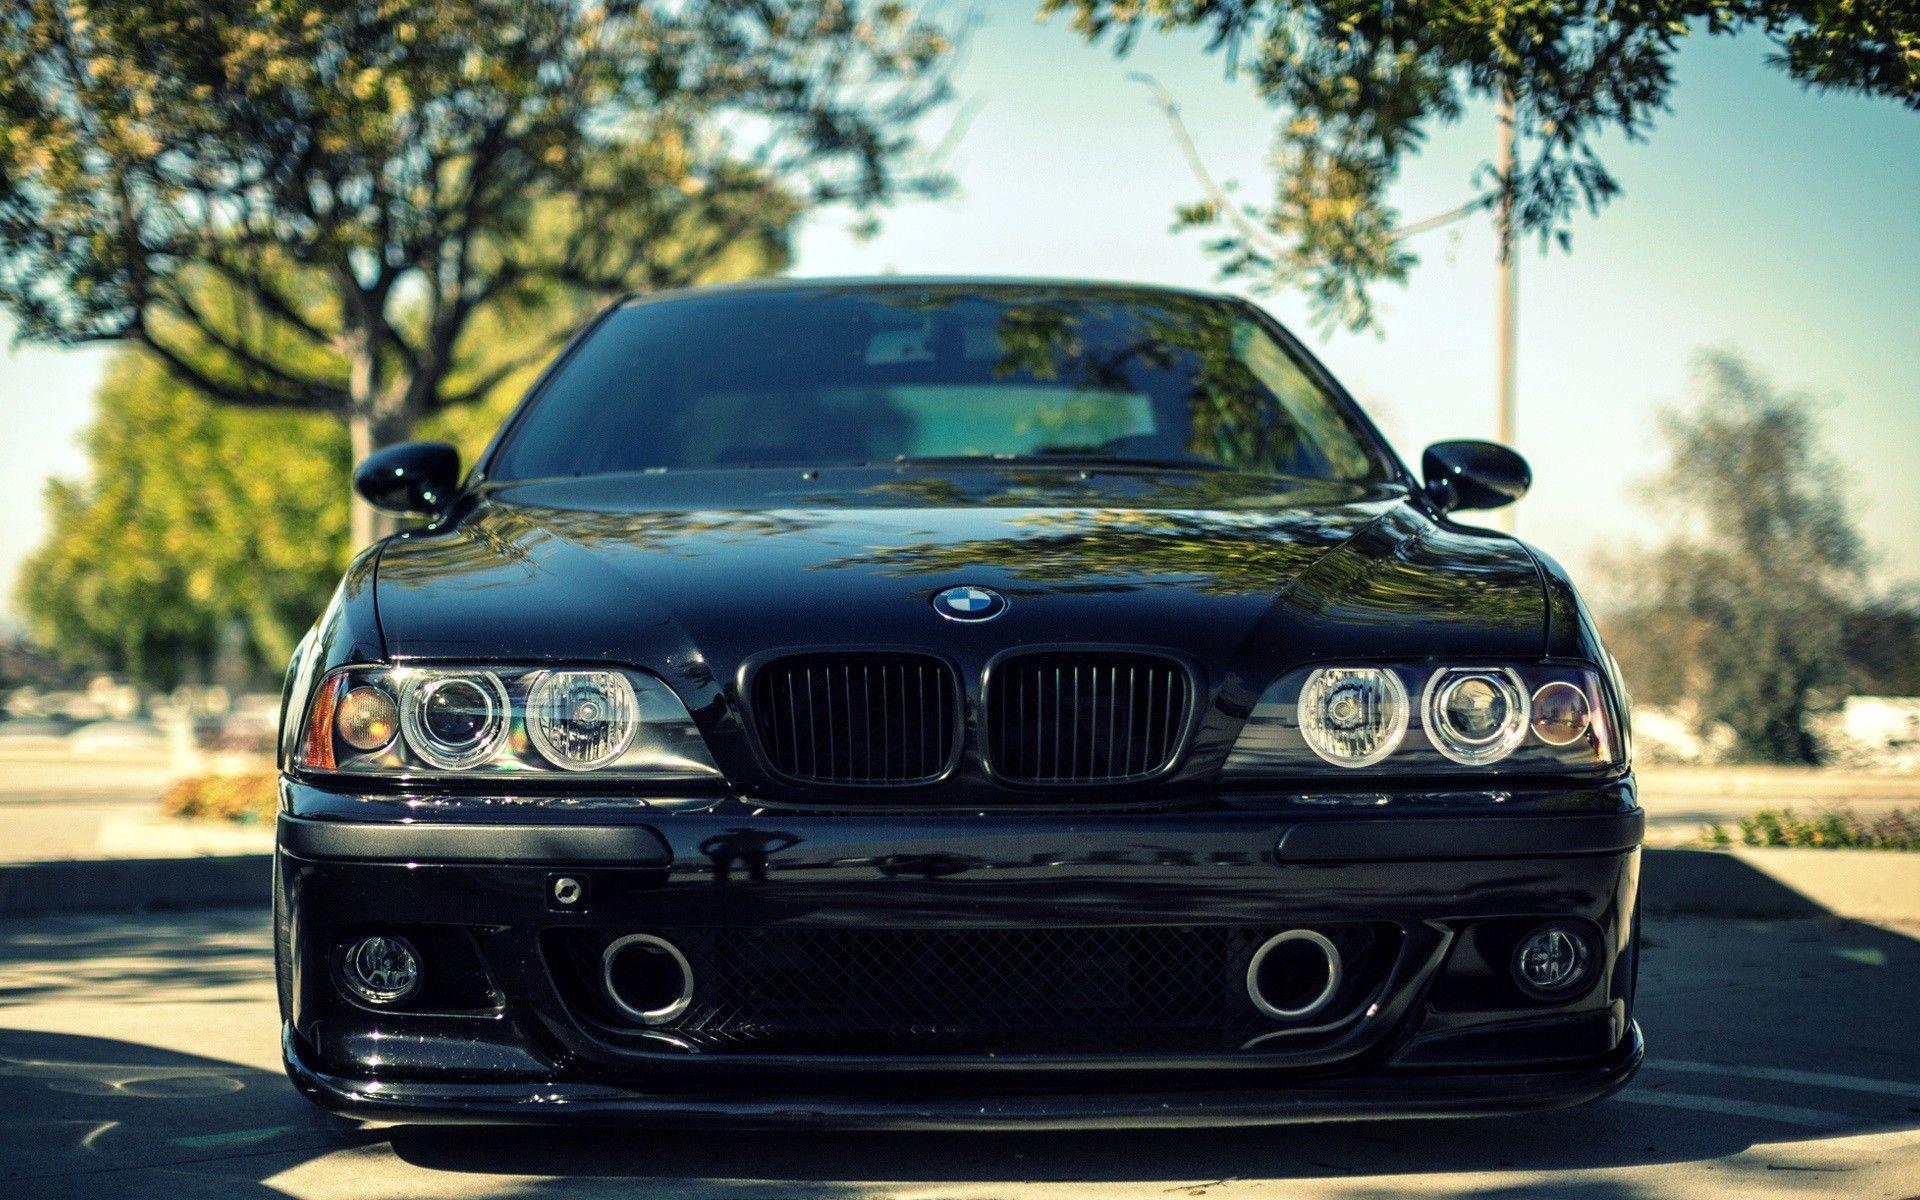 Bmw E39 M5 Wallpapers Top Free Bmw E39 M5 Backgrounds Wallpaperaccess